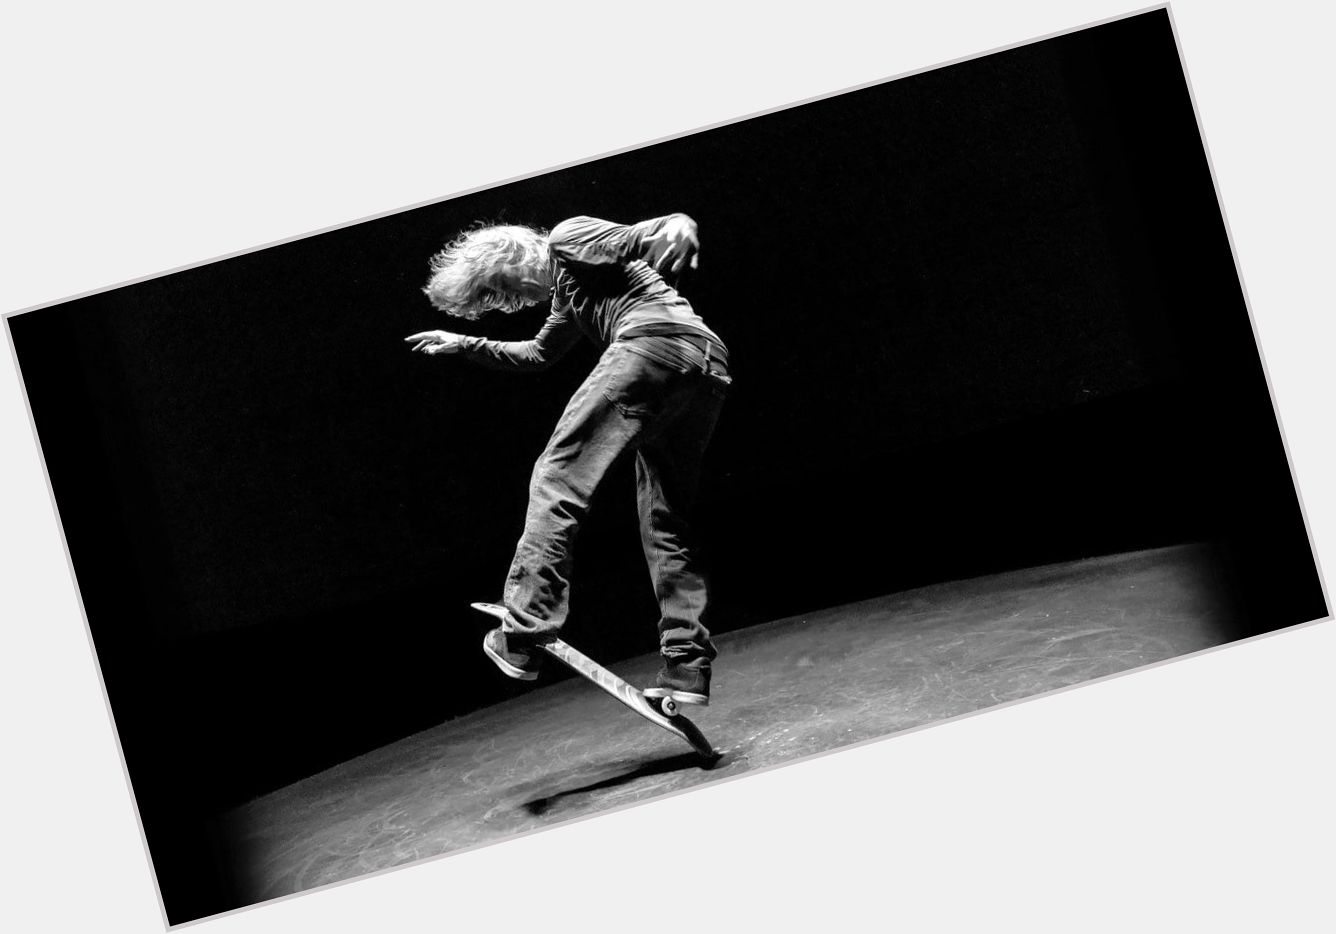 Wishing skateboarder Rodney Mullen a very Happy Birthday from Fueled By Death Cast this week  